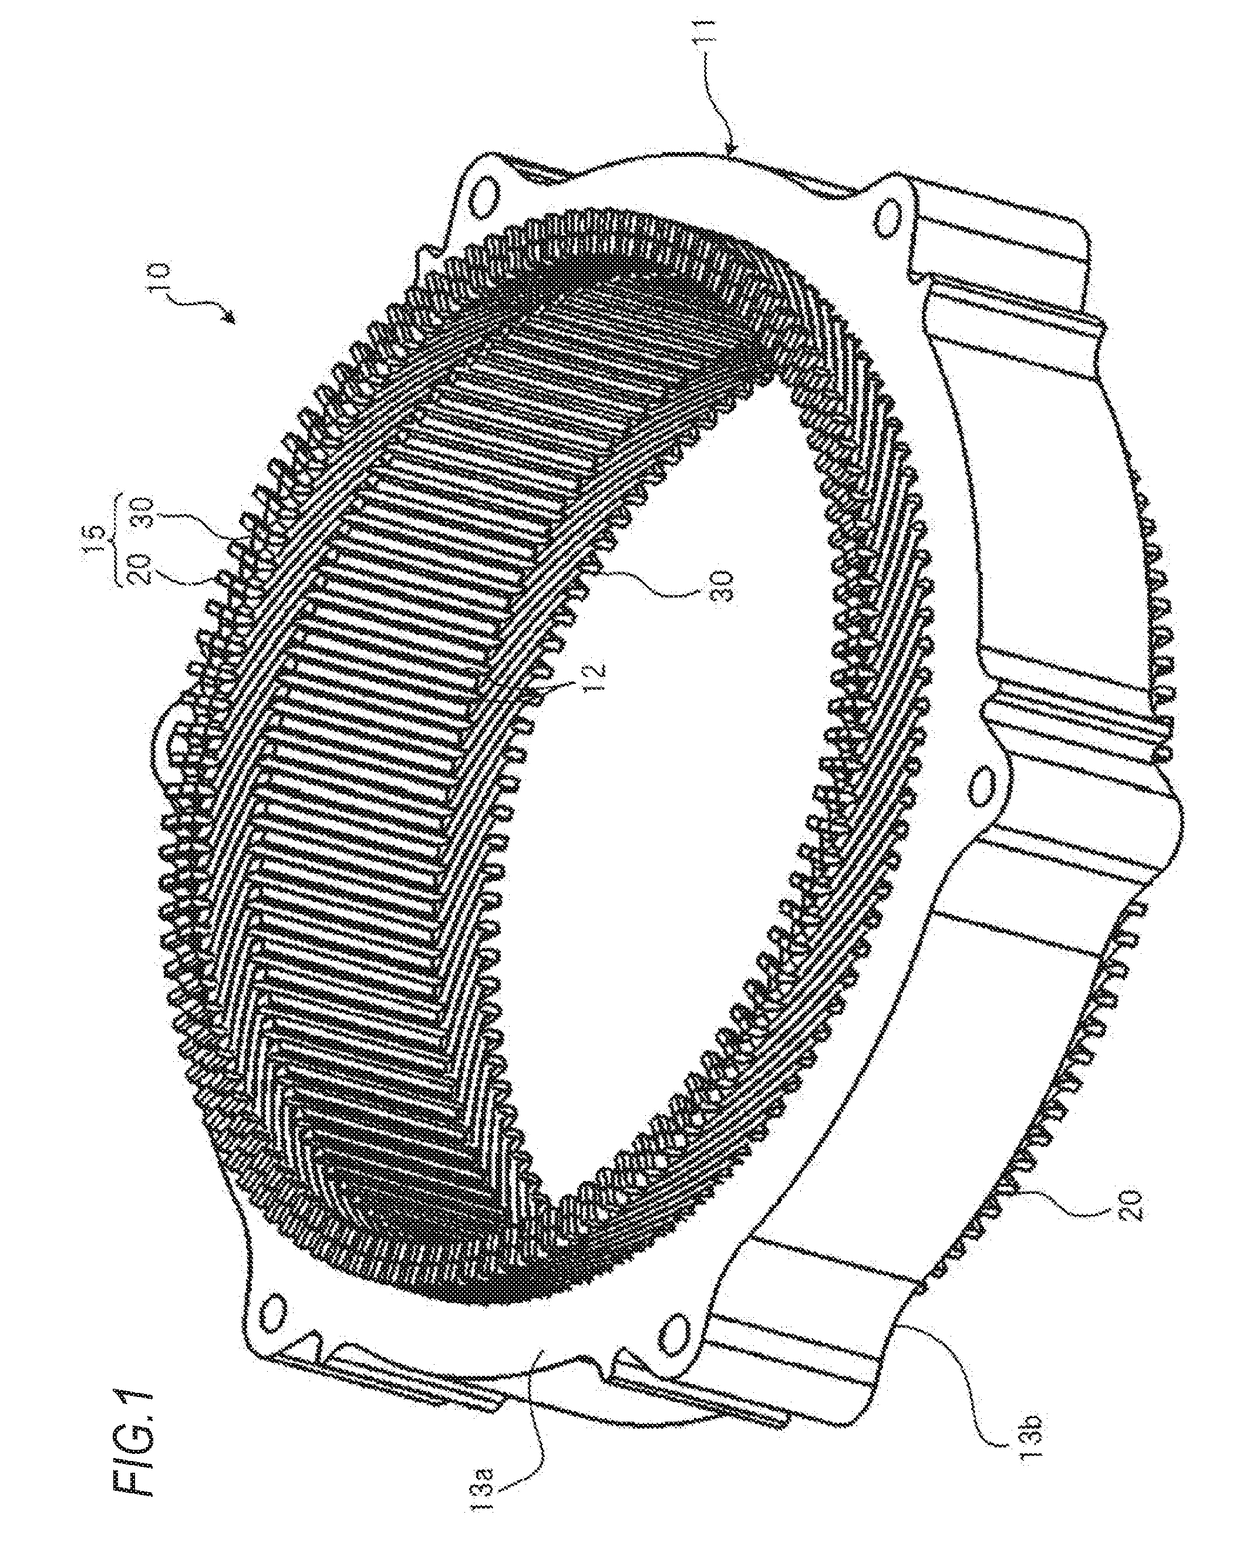 Stator for rotary electric machine